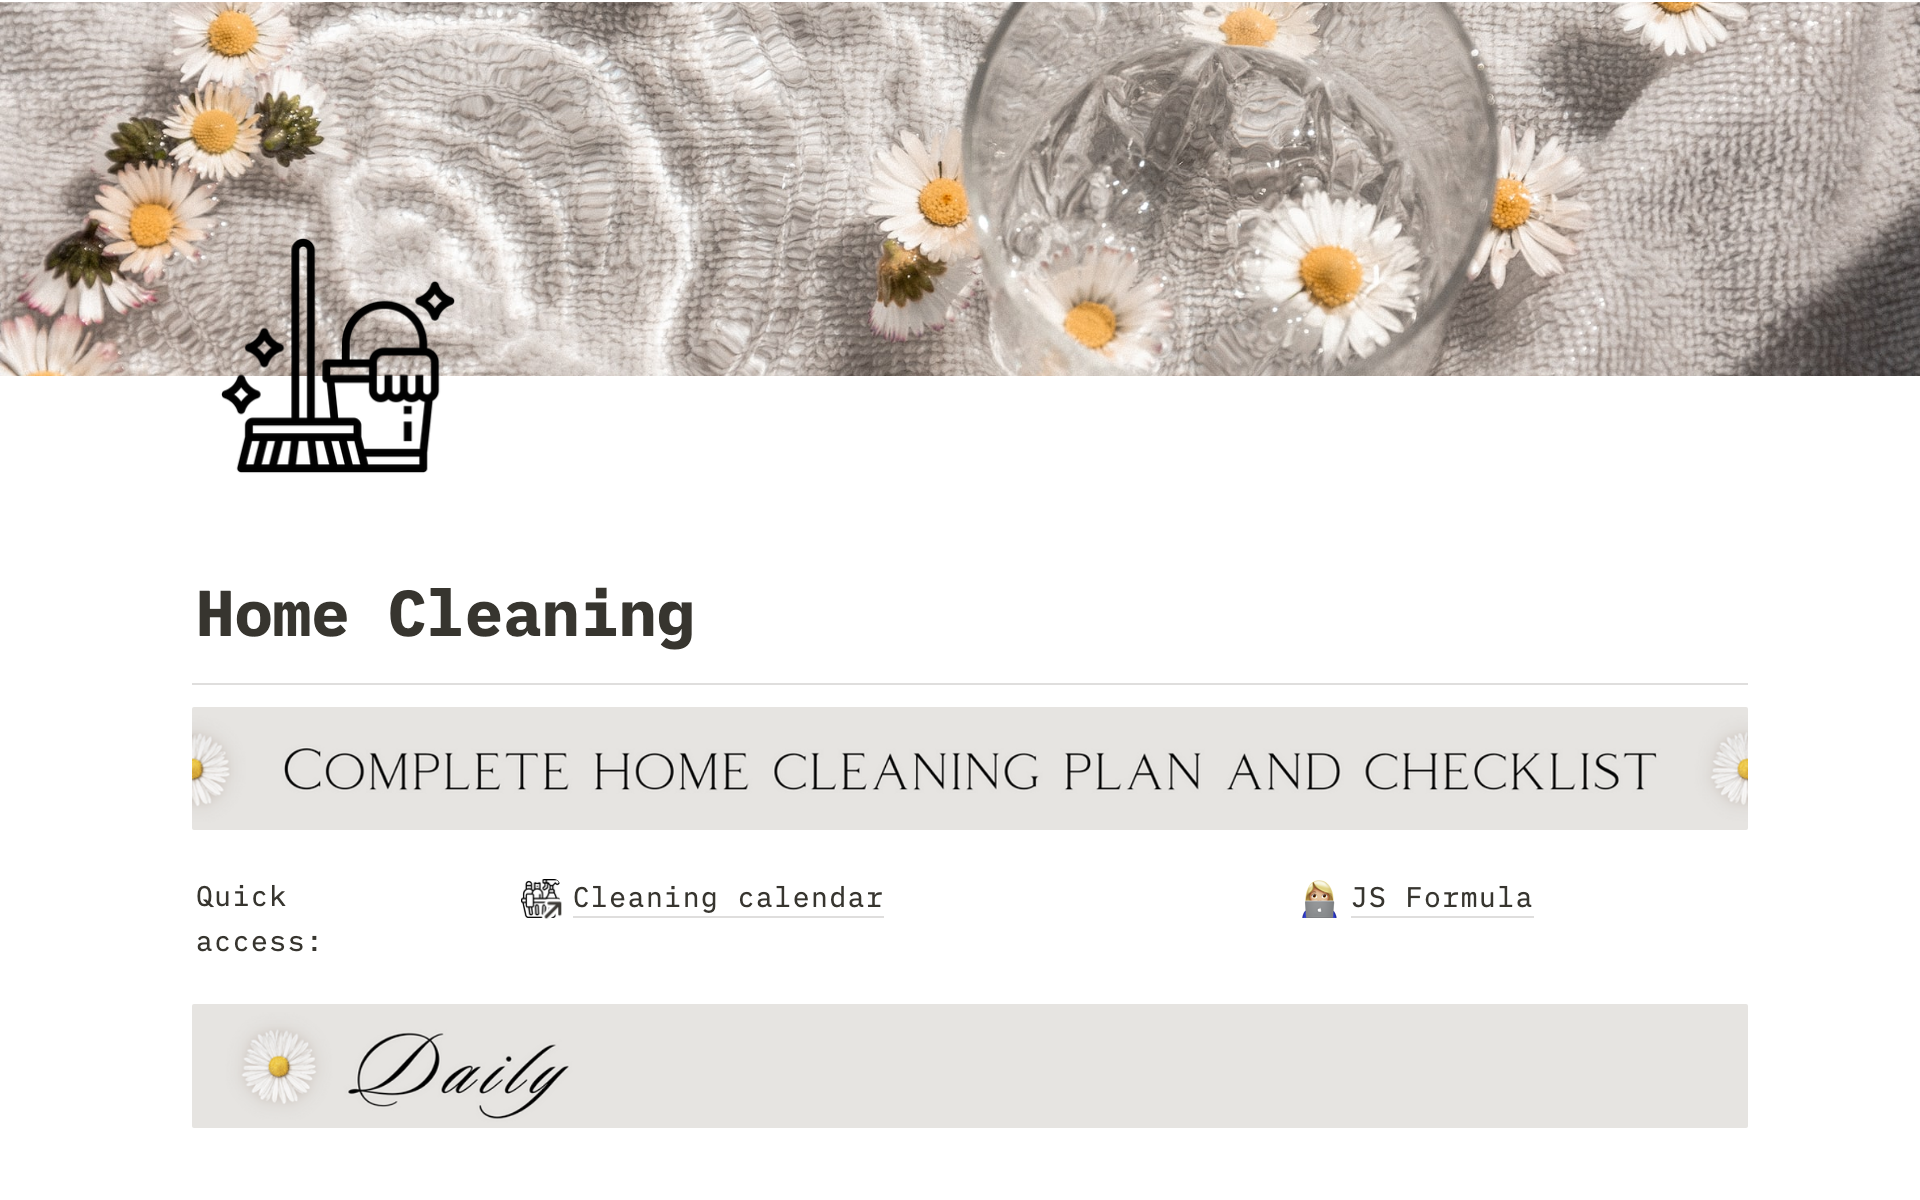 Timeboxing home cleaning tasks and display in a calendar